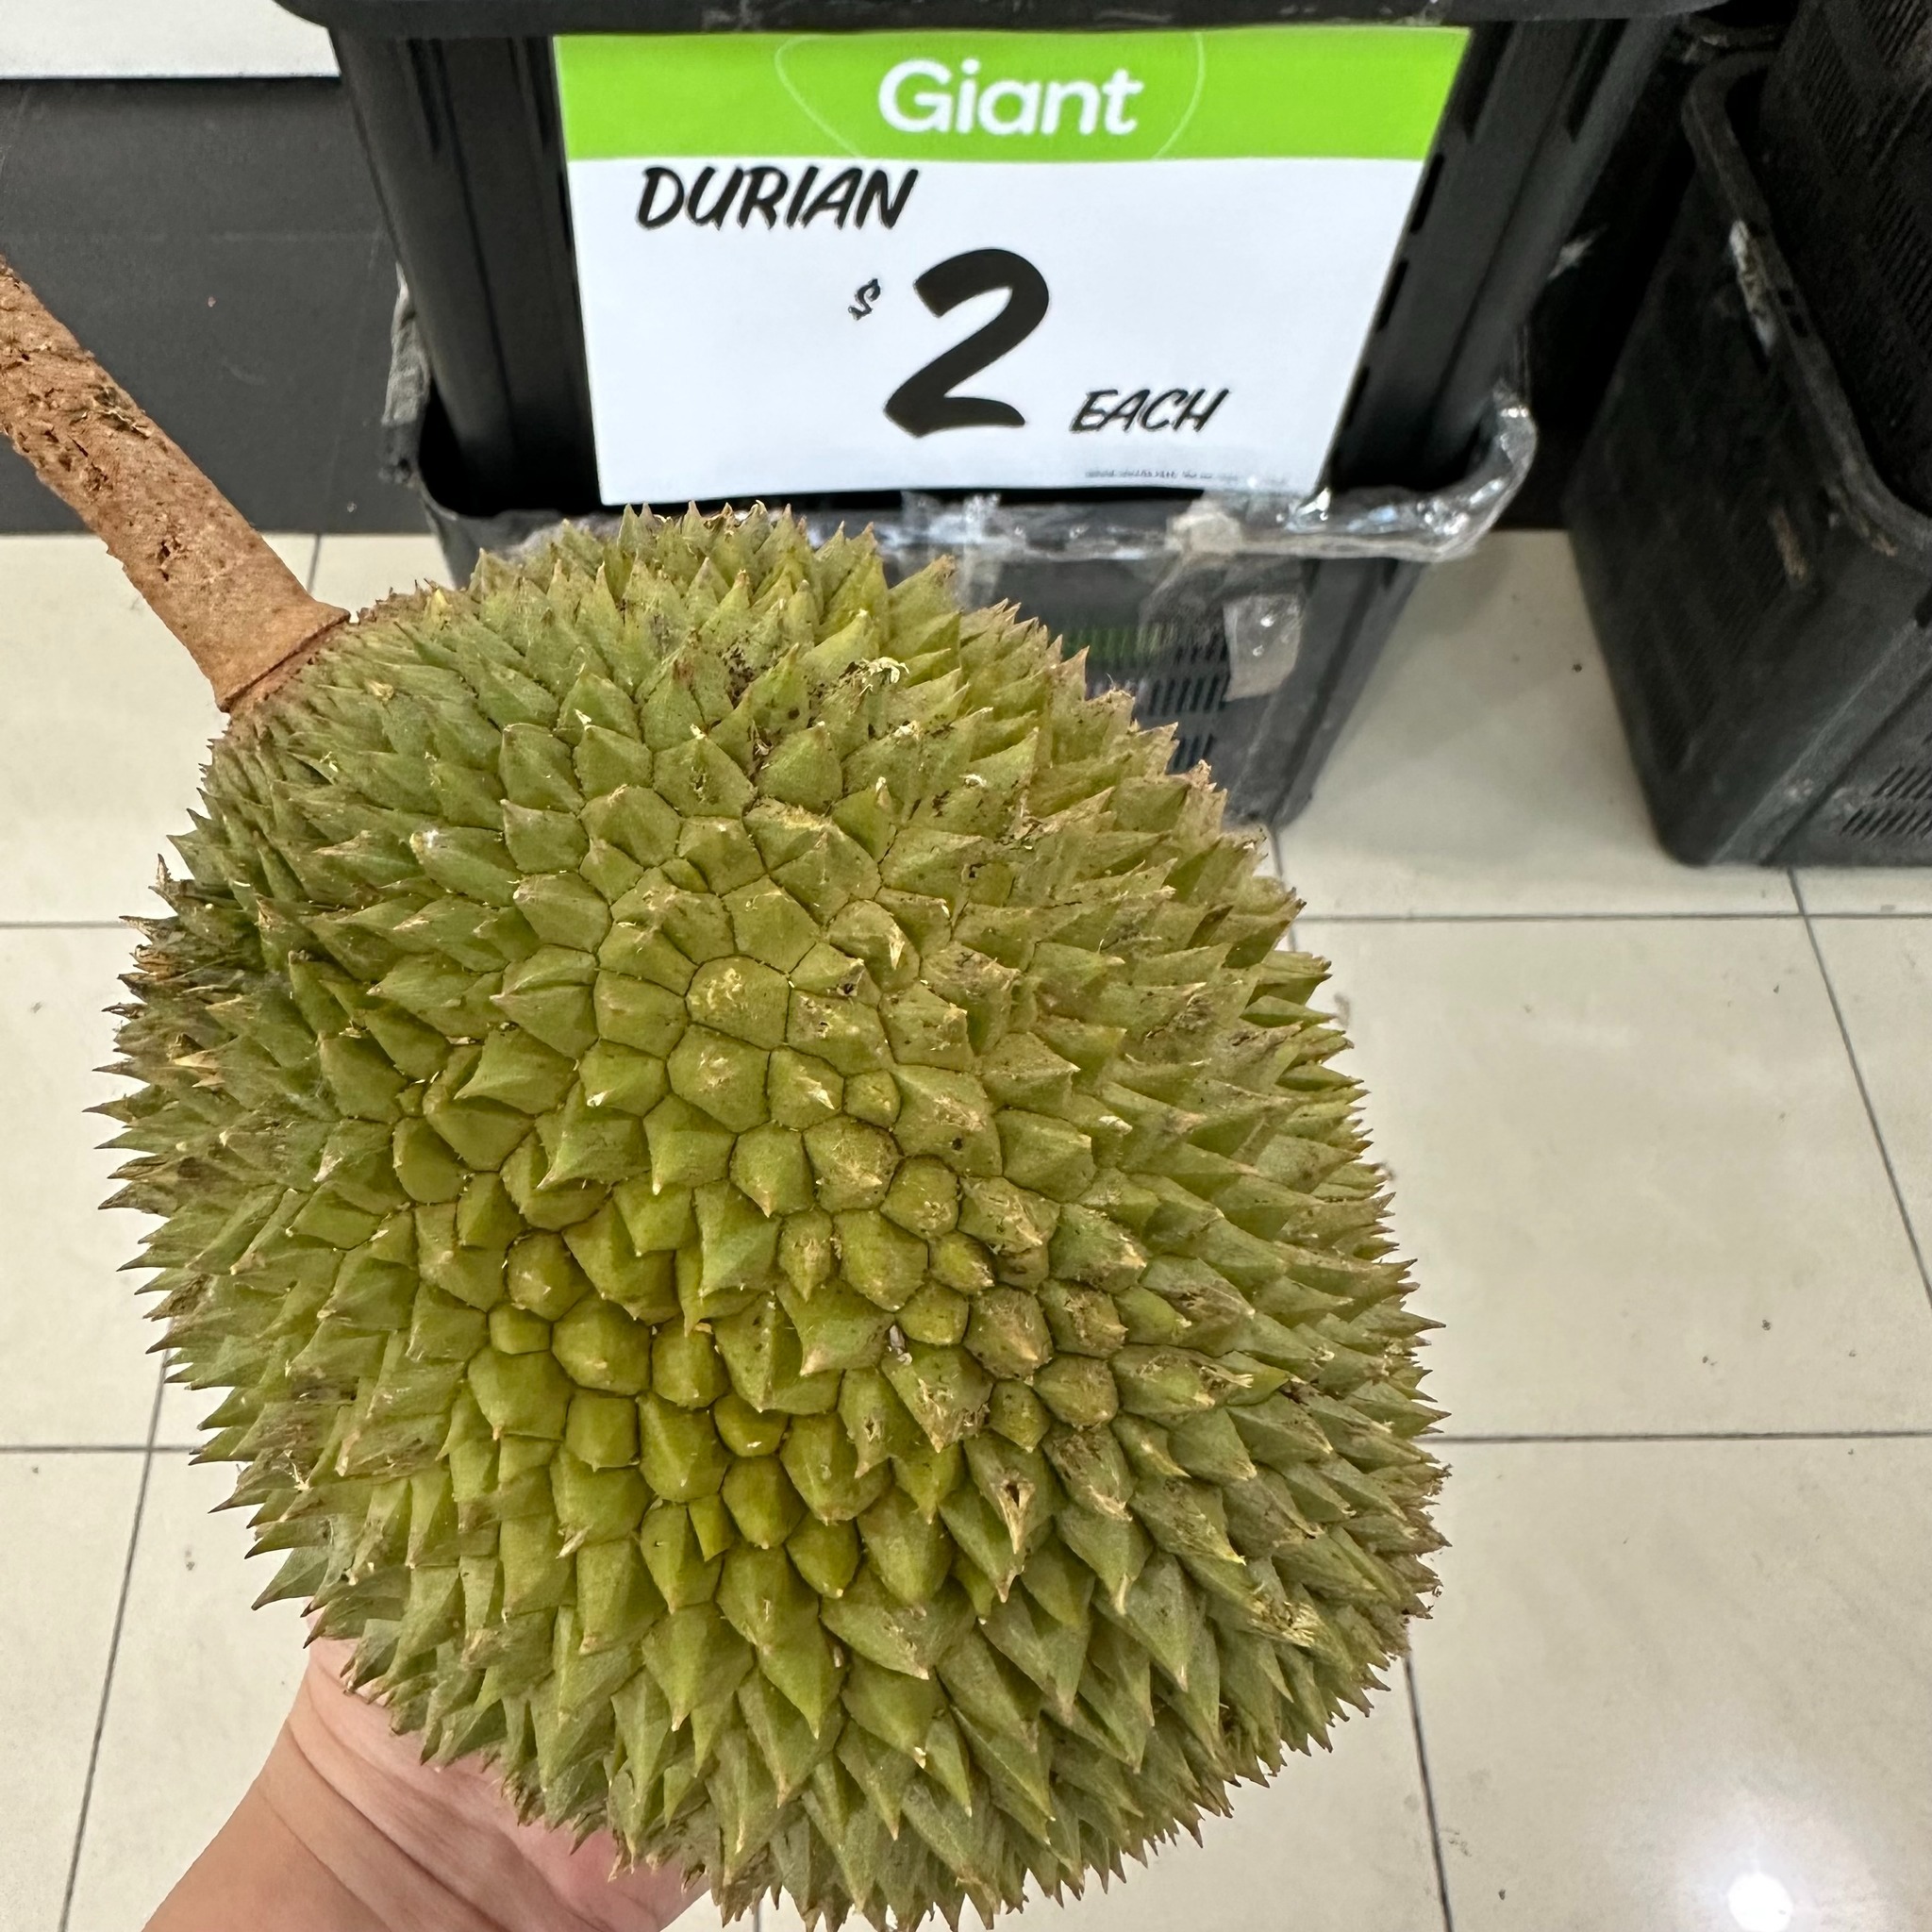 giant tampines durian sale